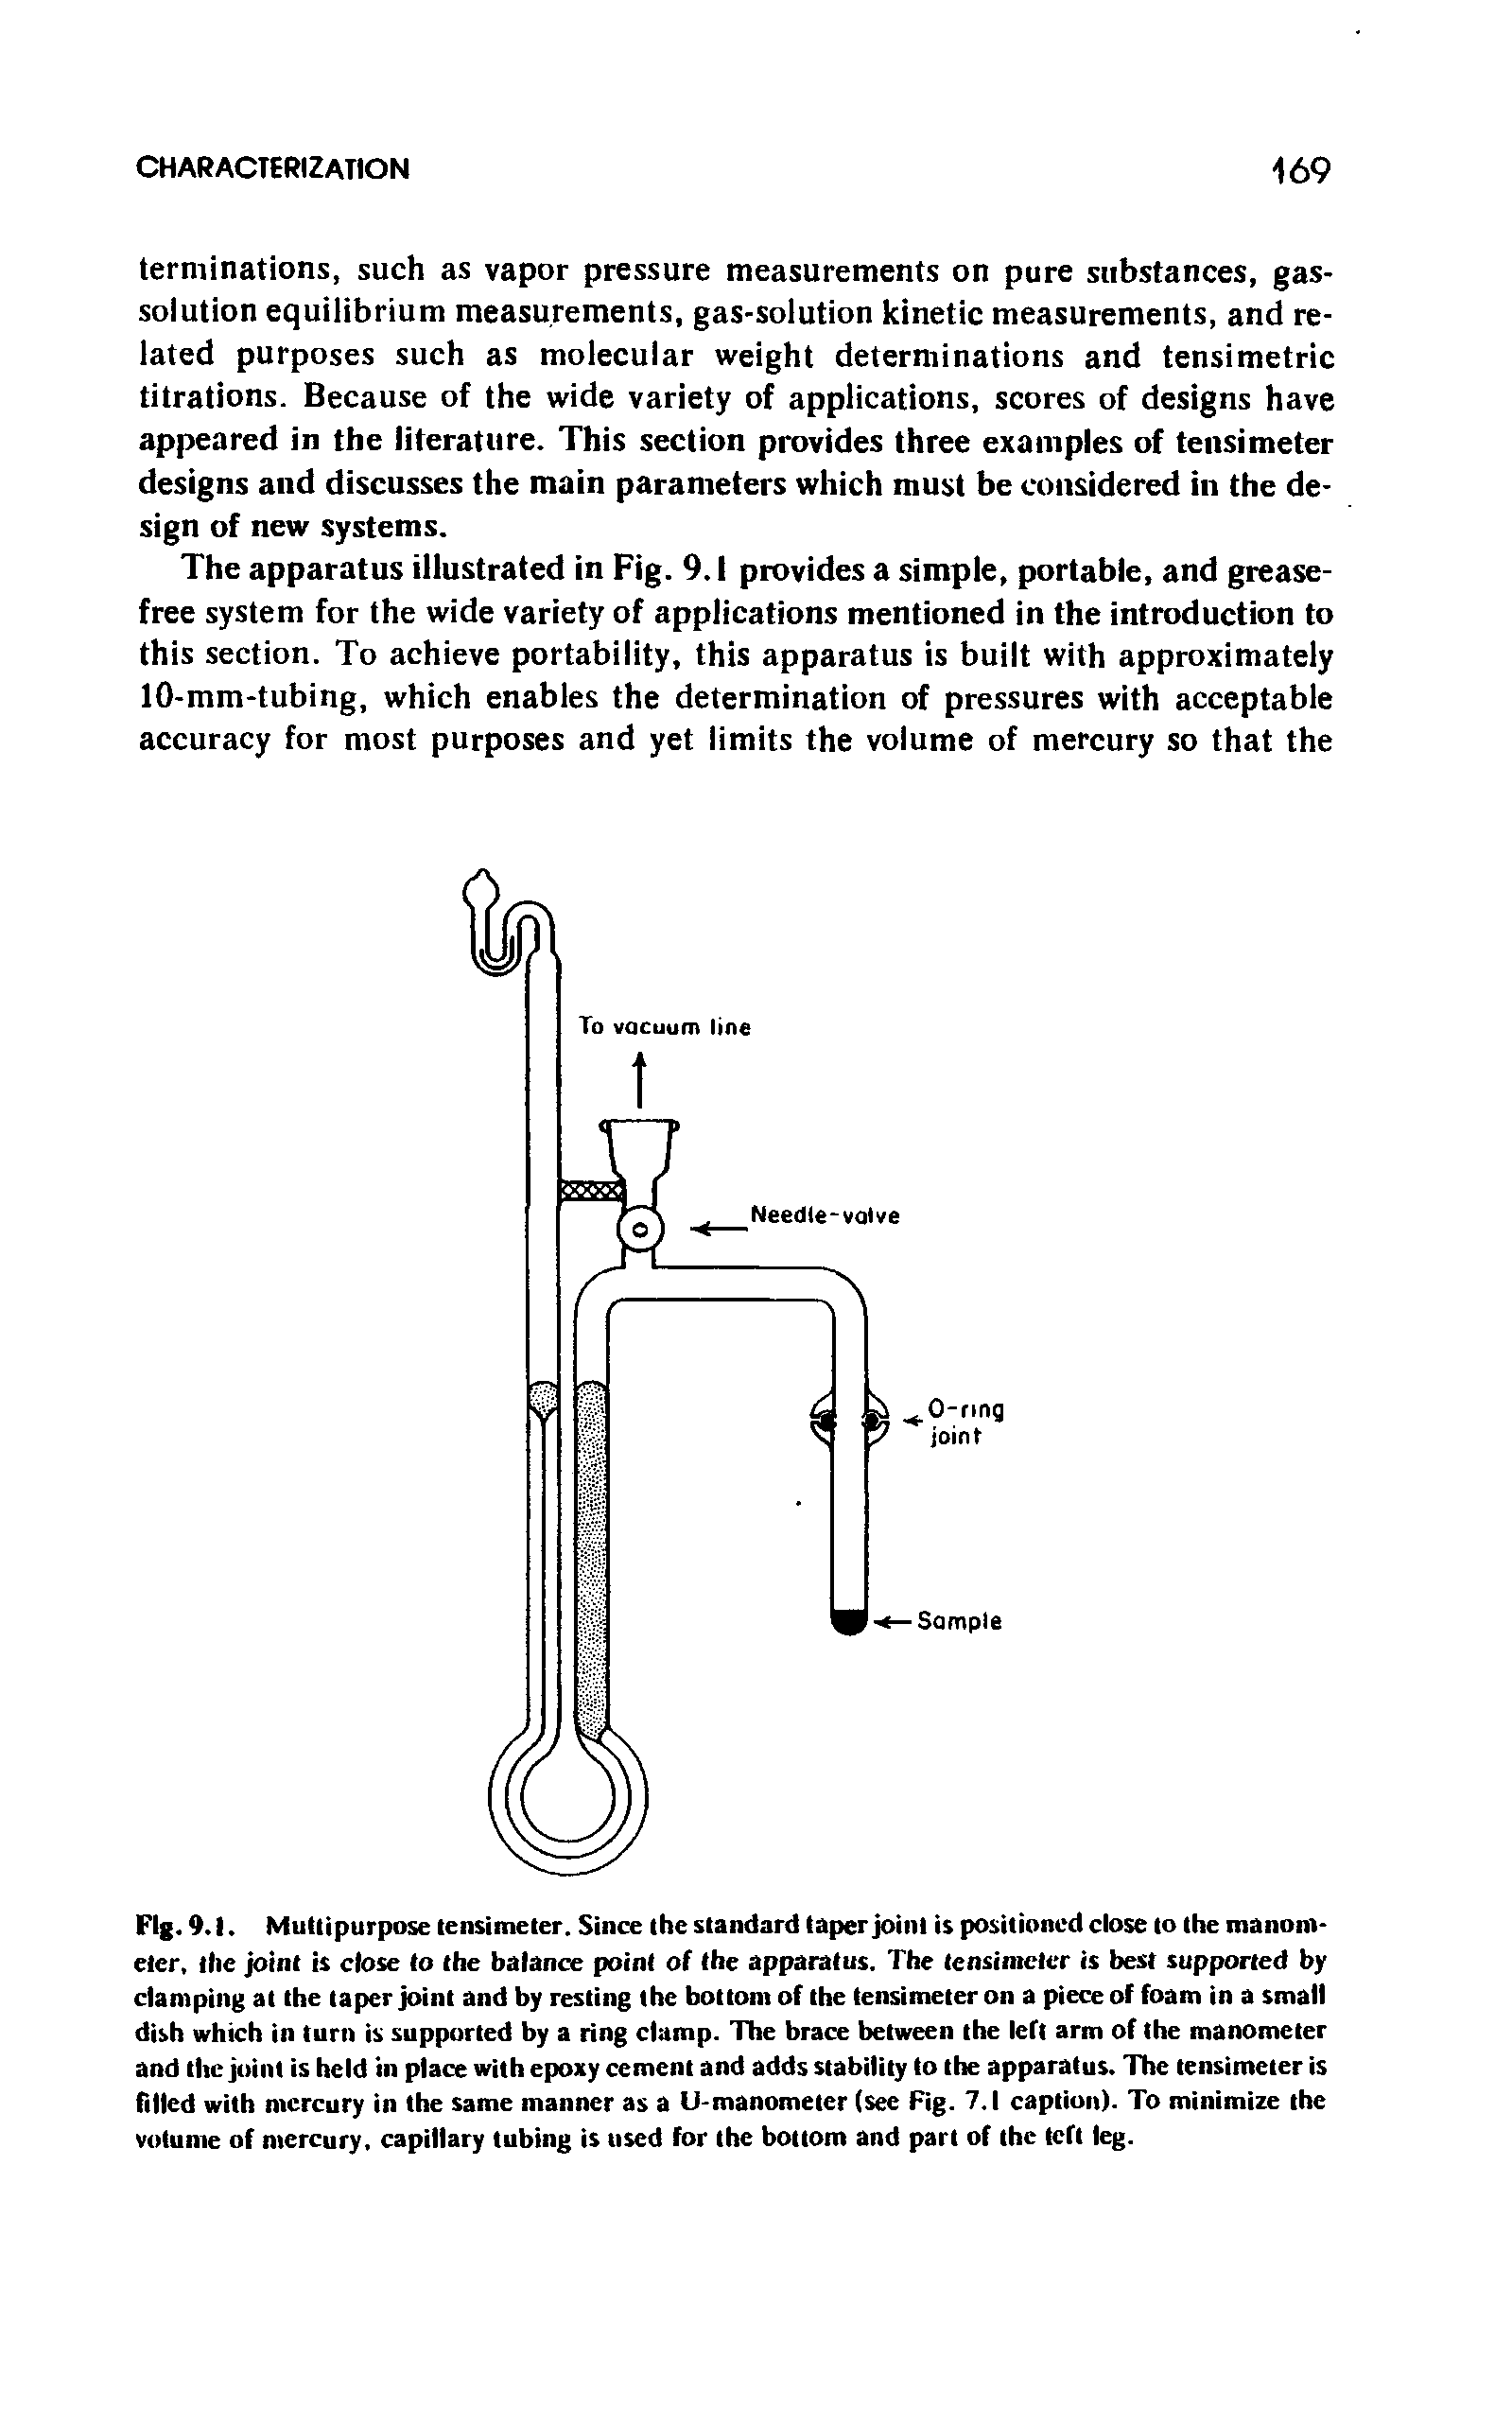 Fig. 9.1. Multipurpose tensimeter. Since the standard taper joint is positioned close to the manometer, the joint is close to the balance point of the apparatus. The tensimeter is best supported by clamping at the taper joint and by resting the bottom of the tensimeter on a piece of foam in a small dish which in turn is supported by a ring clamp. The brace between the left arm of the manometer and the joint is held in place with epoxy cement and adds stability to the apparatus. The tensimeter is Tilled with mercury in the same manner as a U-manometer (see Fig. 7.1 caption). To minimize the votume of mercury, capillary tubing is used for the bottom and part of the teft leg.